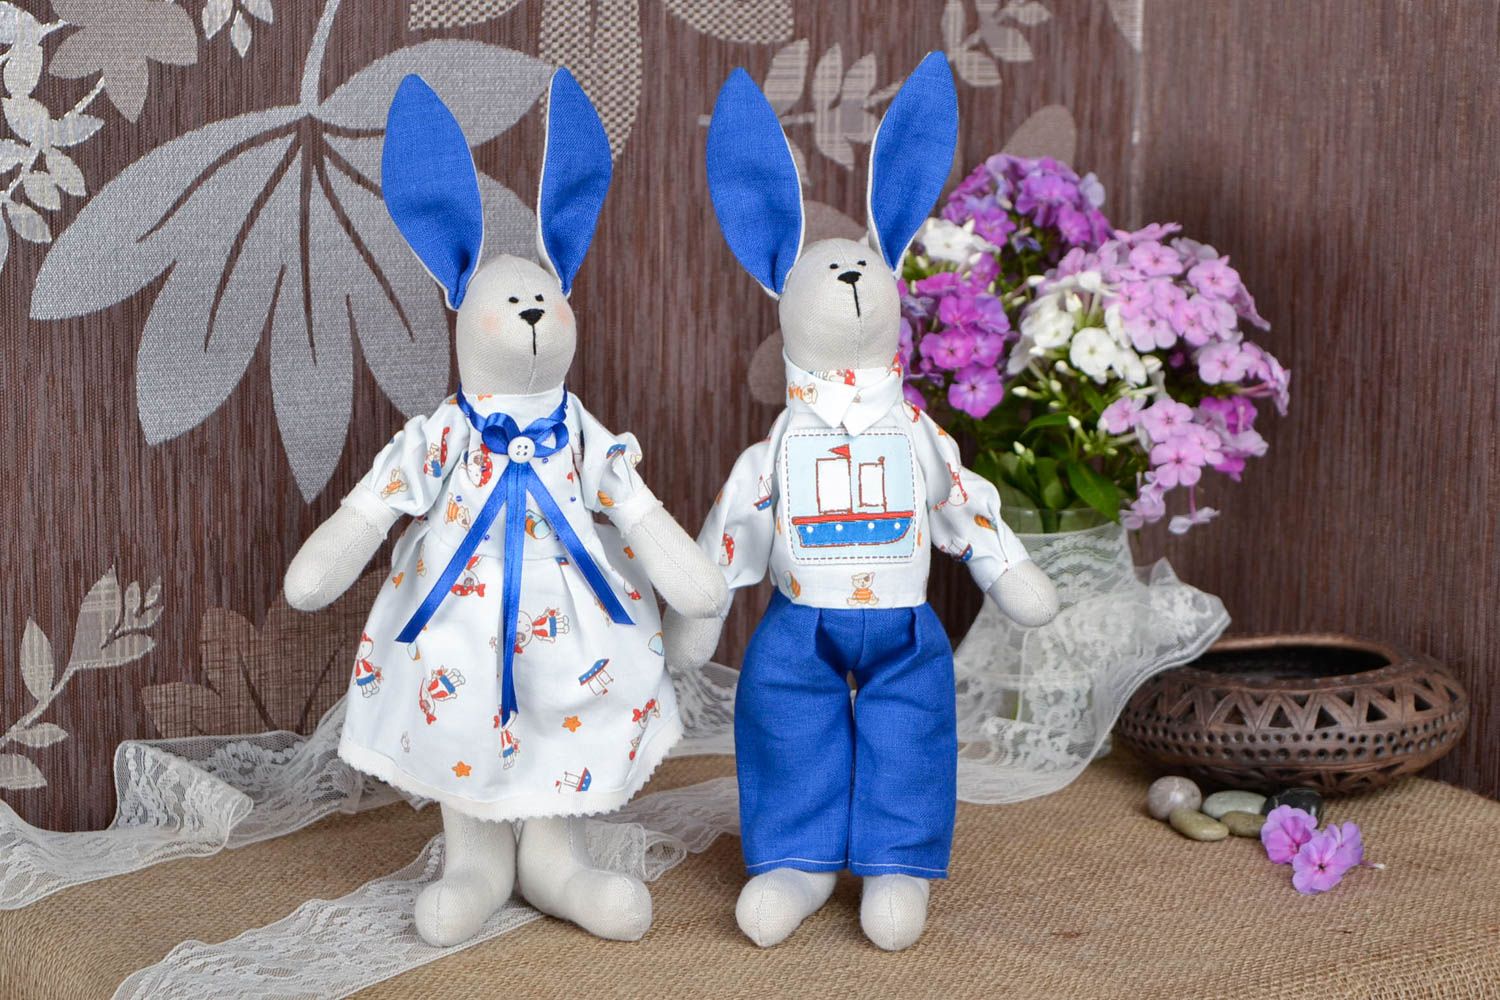 Rabbit toy homemade toys soft toys stuffed animals gift ideas for children photo 1